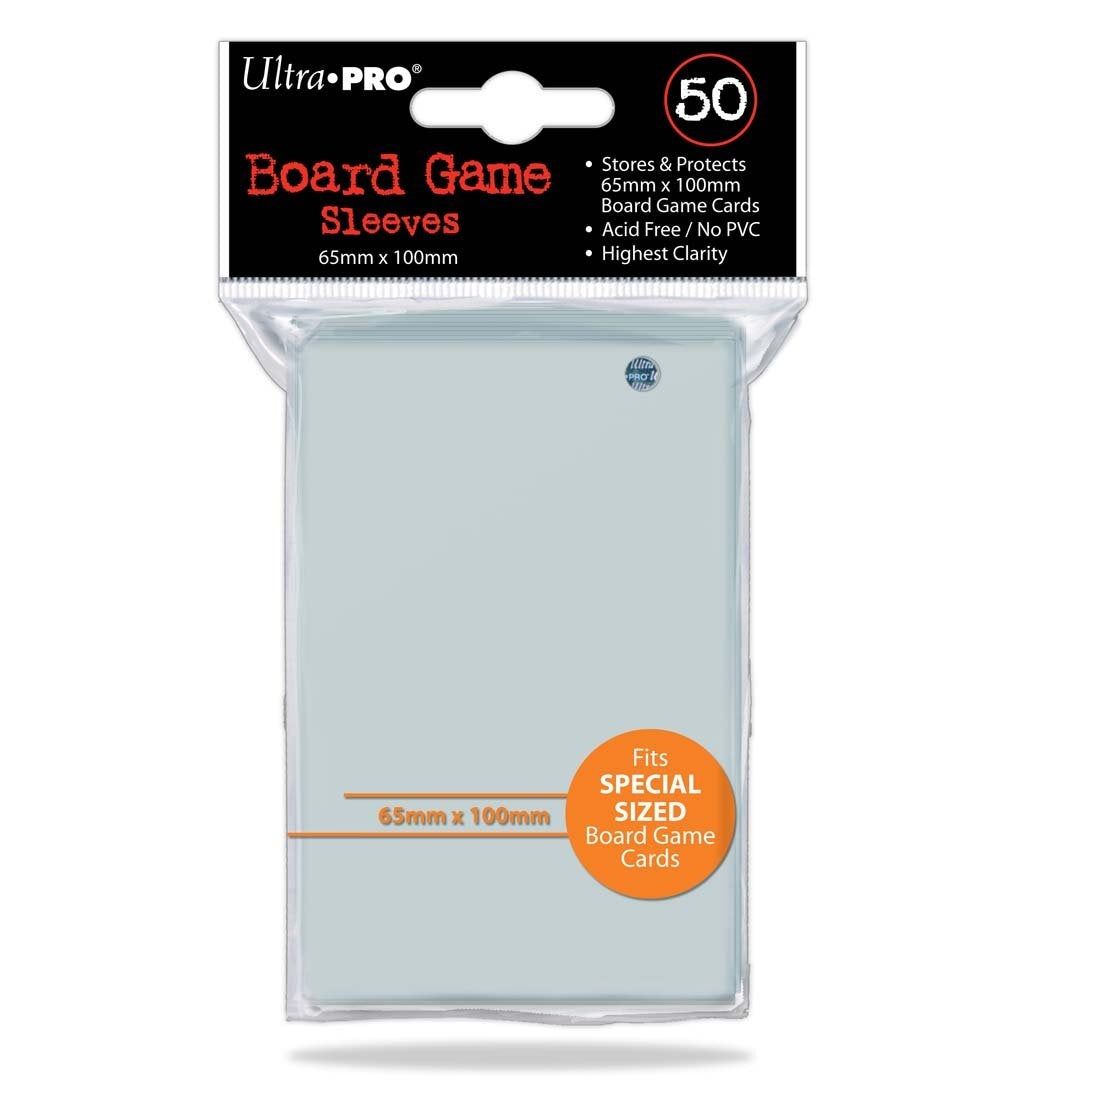 Ultra PRO Board Game Card Sleeve 50ct Fits Special Sized [65mm X 100mm] (Clear)